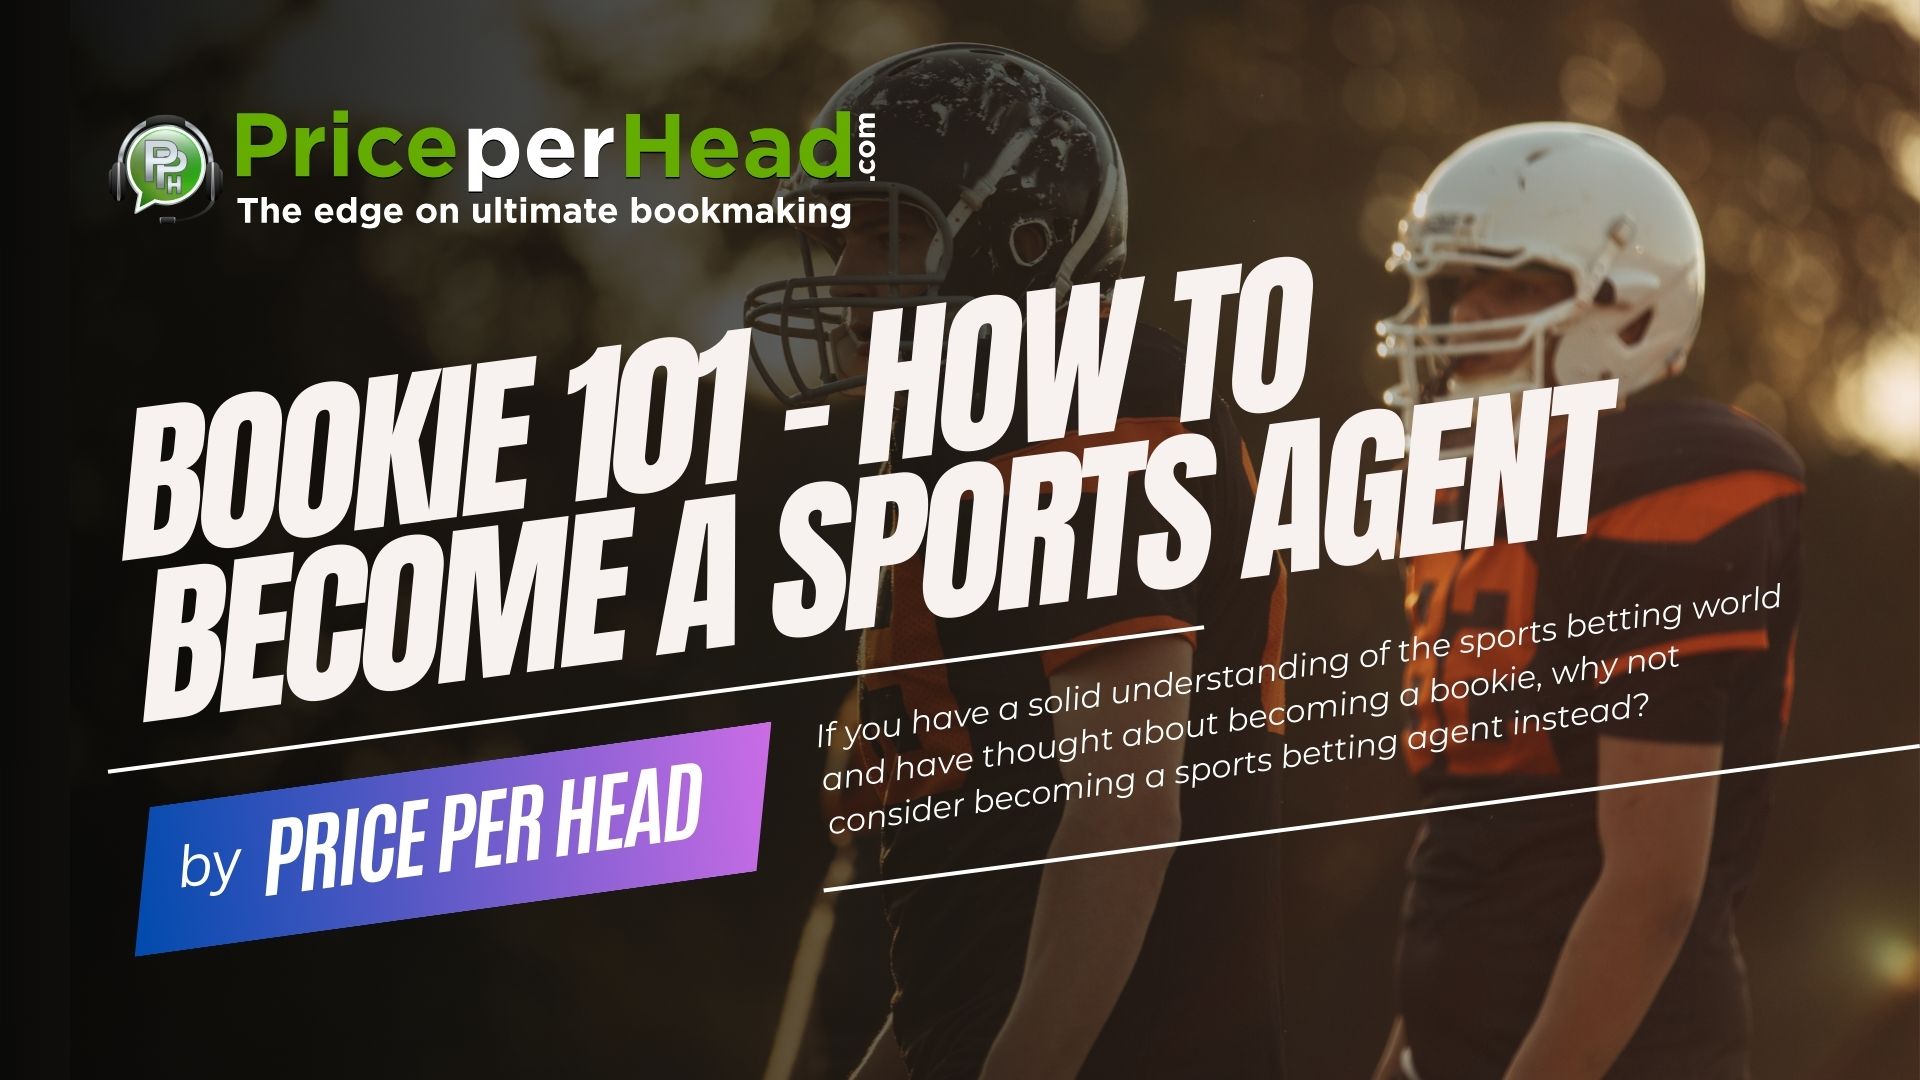 how to become a sports agent, pay per head services, price per head